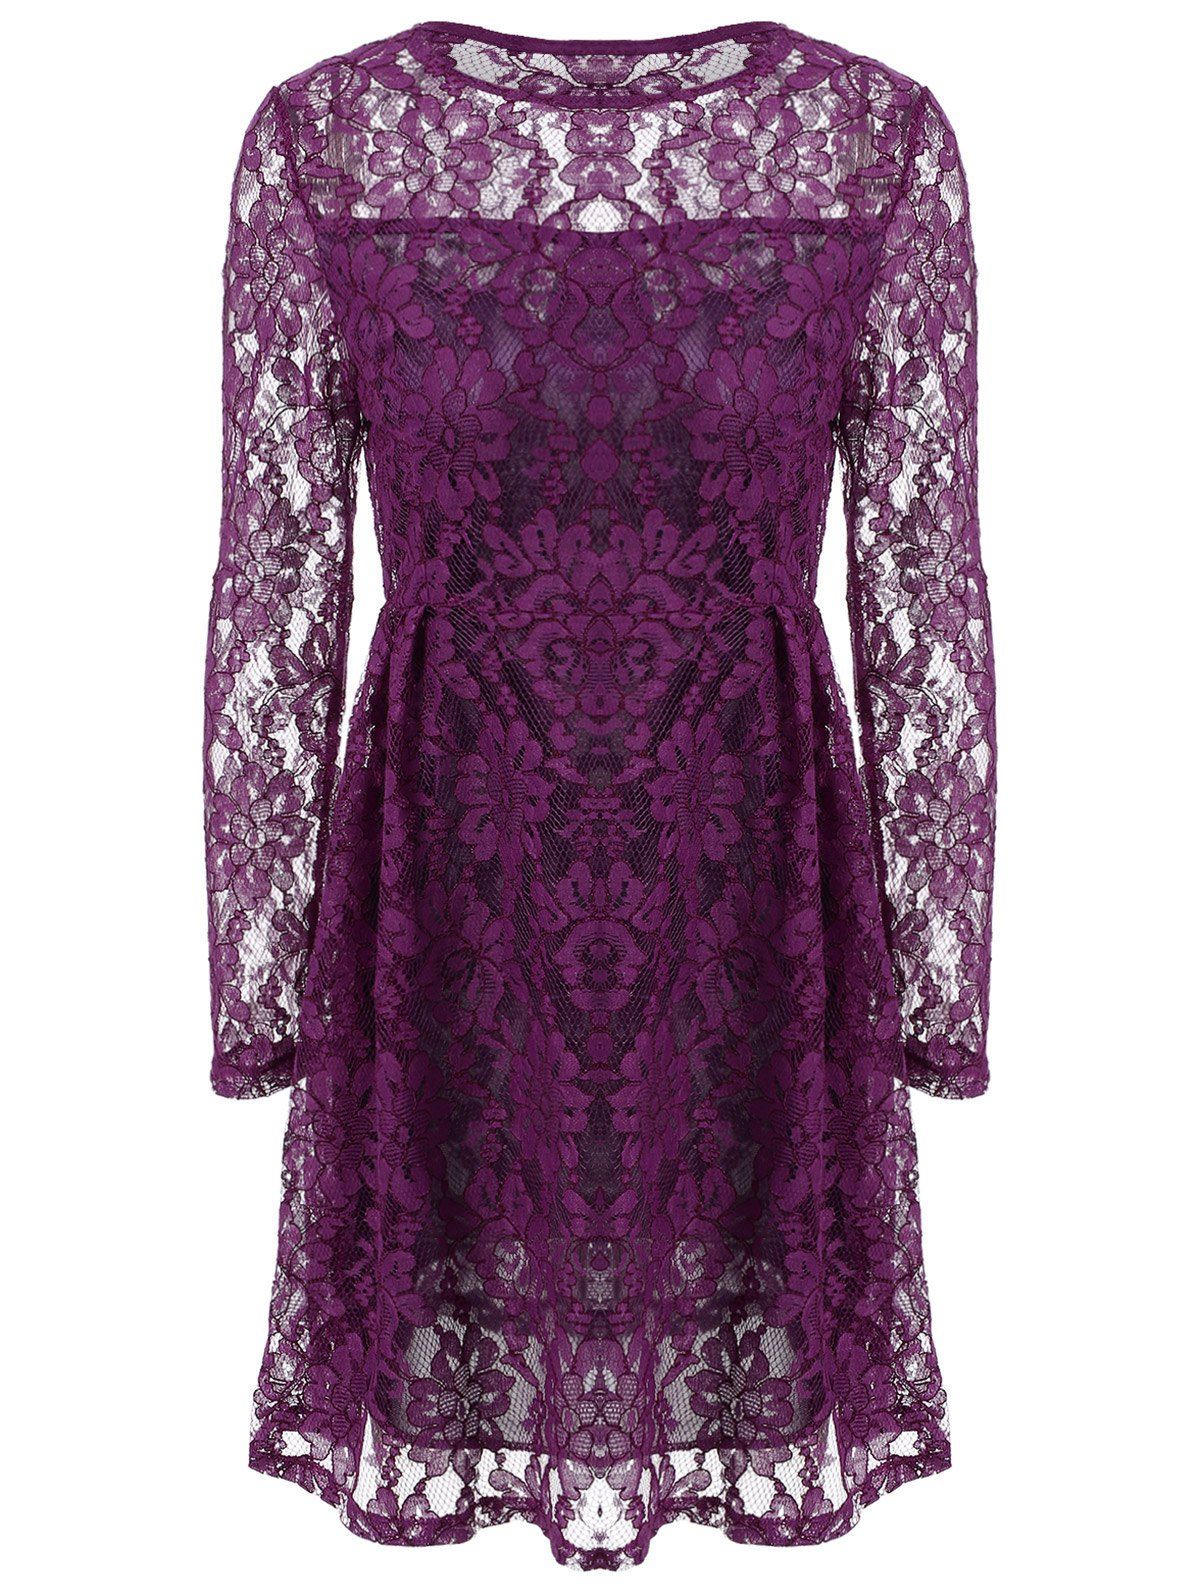 [17% OFF] 2021 Lace See Thru Dress With Sleeves In PURPLE | DressLily